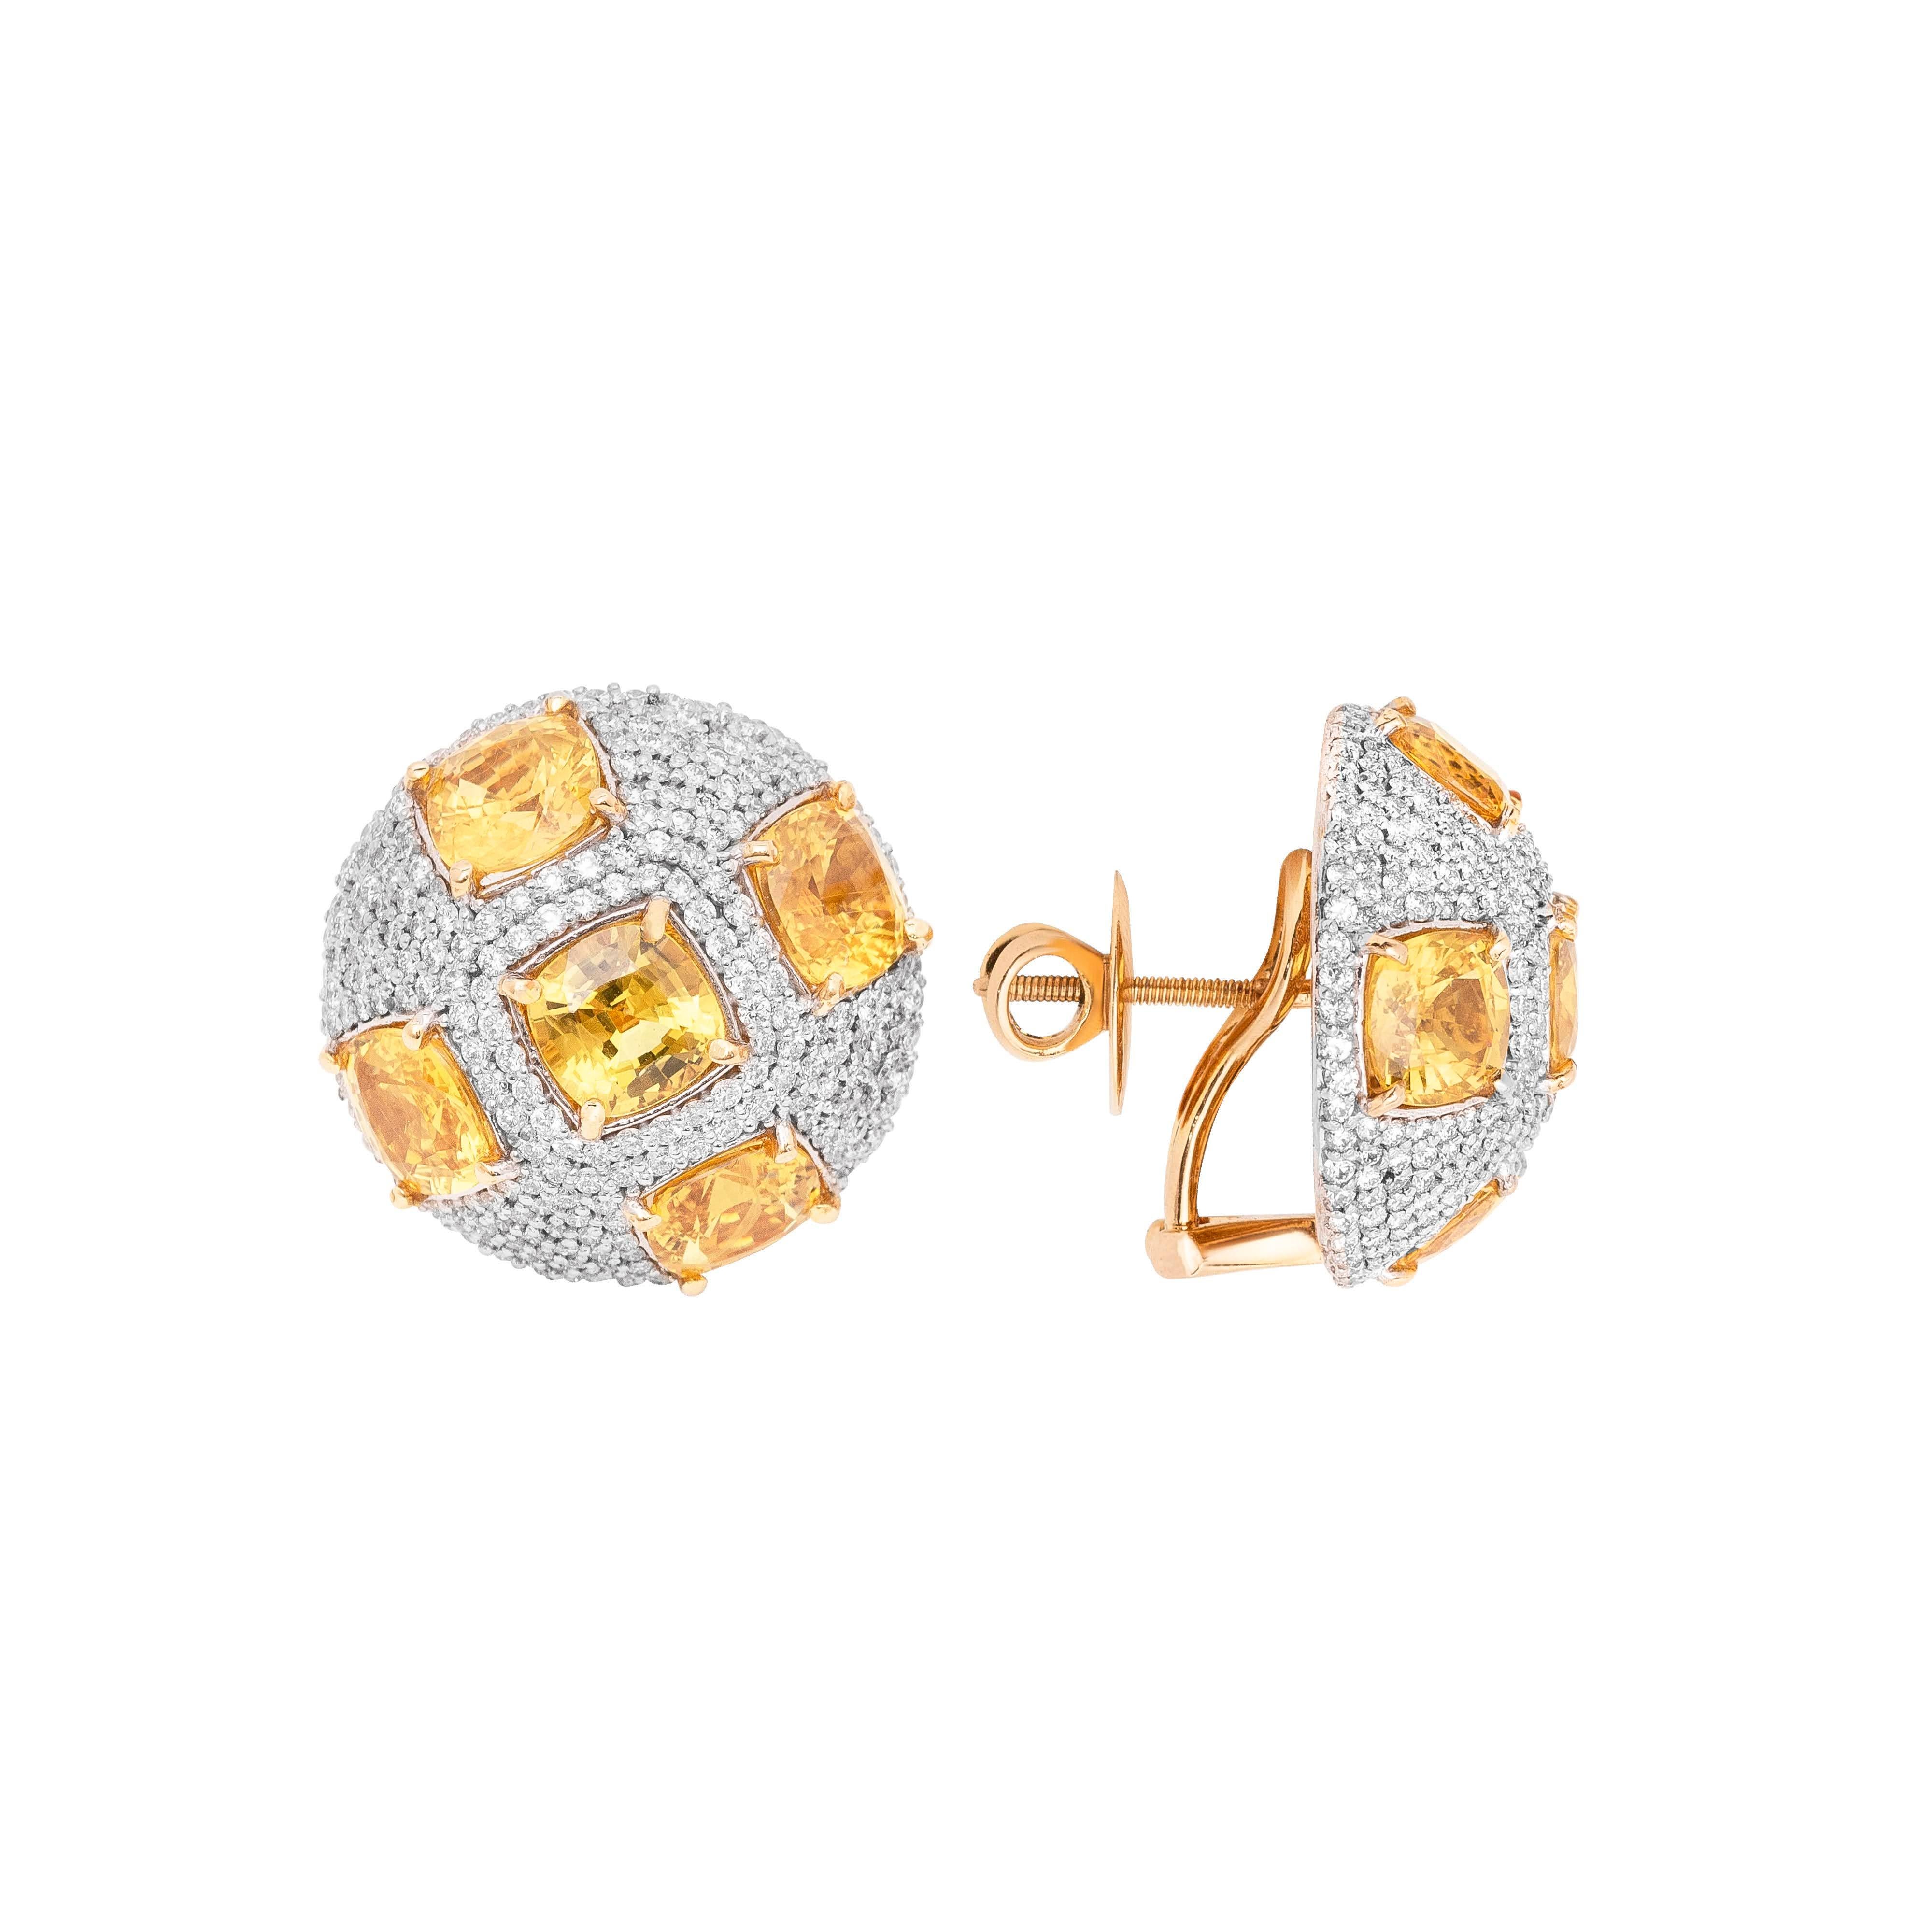 18 Karat Yellow Gold Yellow Sapphire And Diamond Stud Earrings.

Gorgeous one of a kind cocktail earrings studded with yellow sapphires and white diamonds (VVS-VS Purity) set in 18kt yellow gold. 

Yellow sapphires are known to add wealth and bring